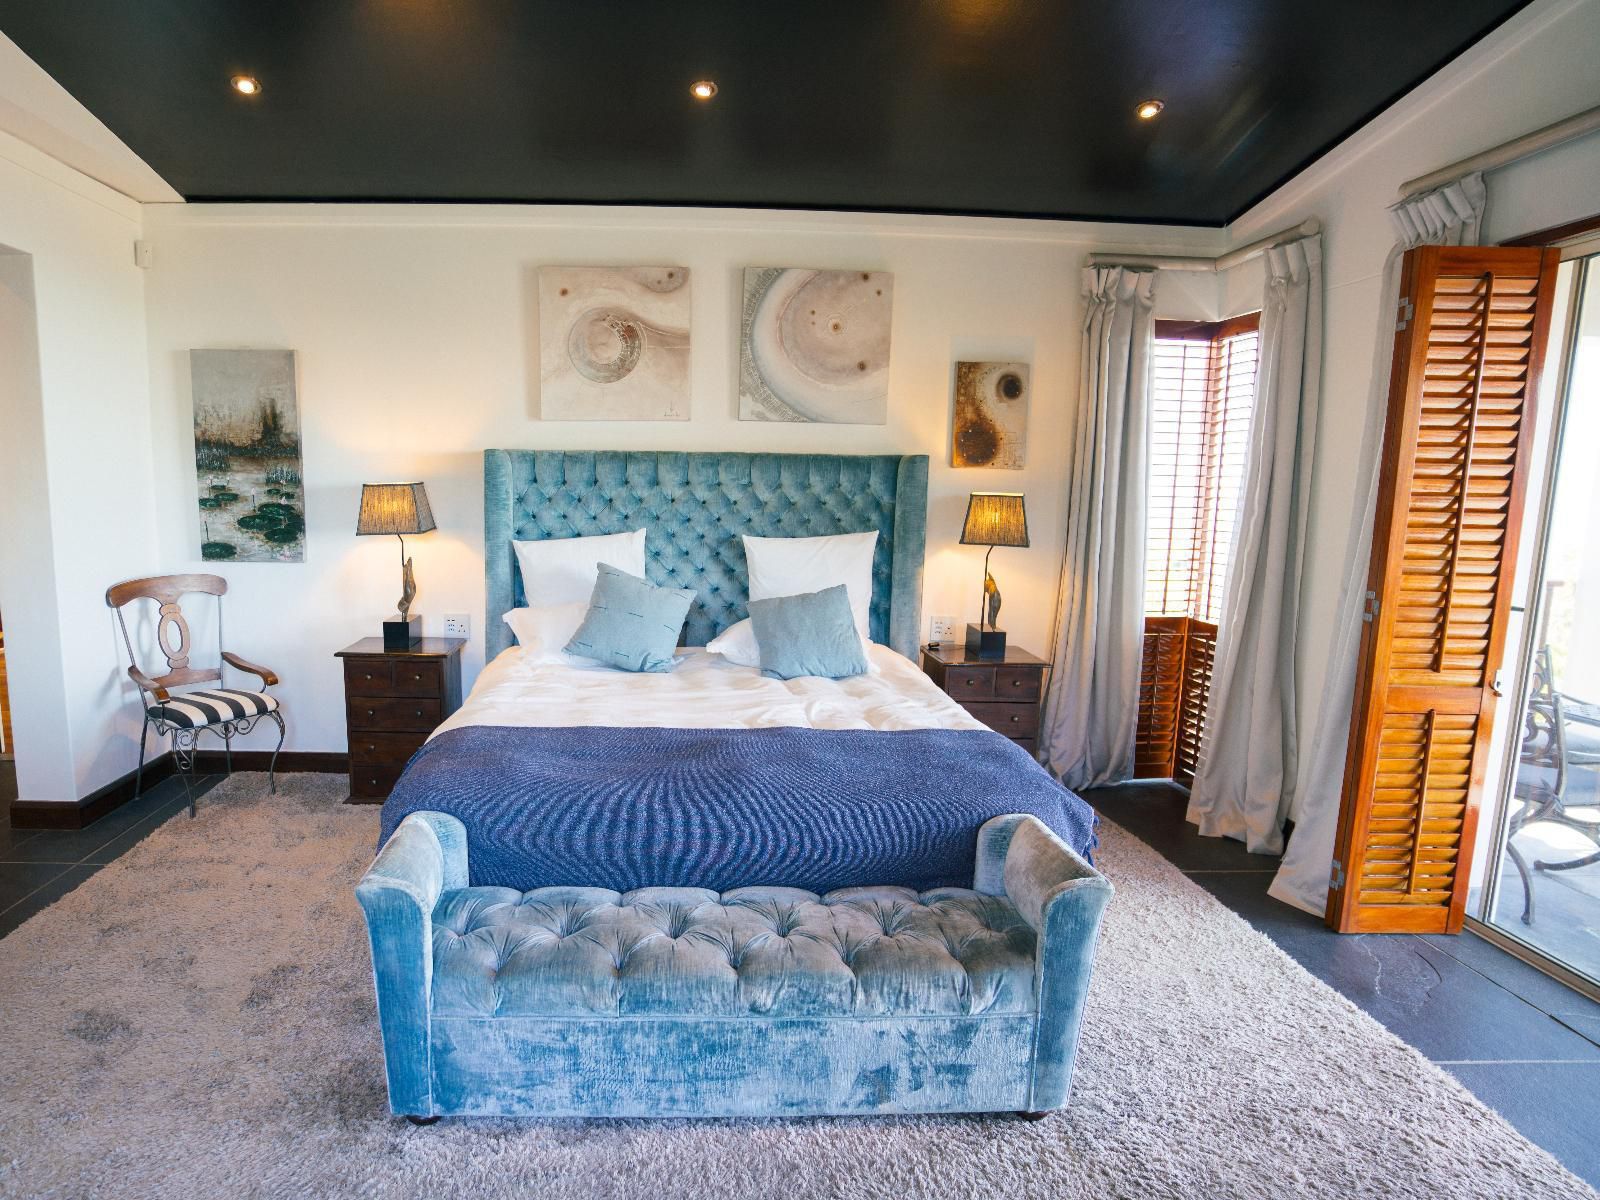 The Cape Bali Camps Bay Cape Town Western Cape South Africa Bedroom